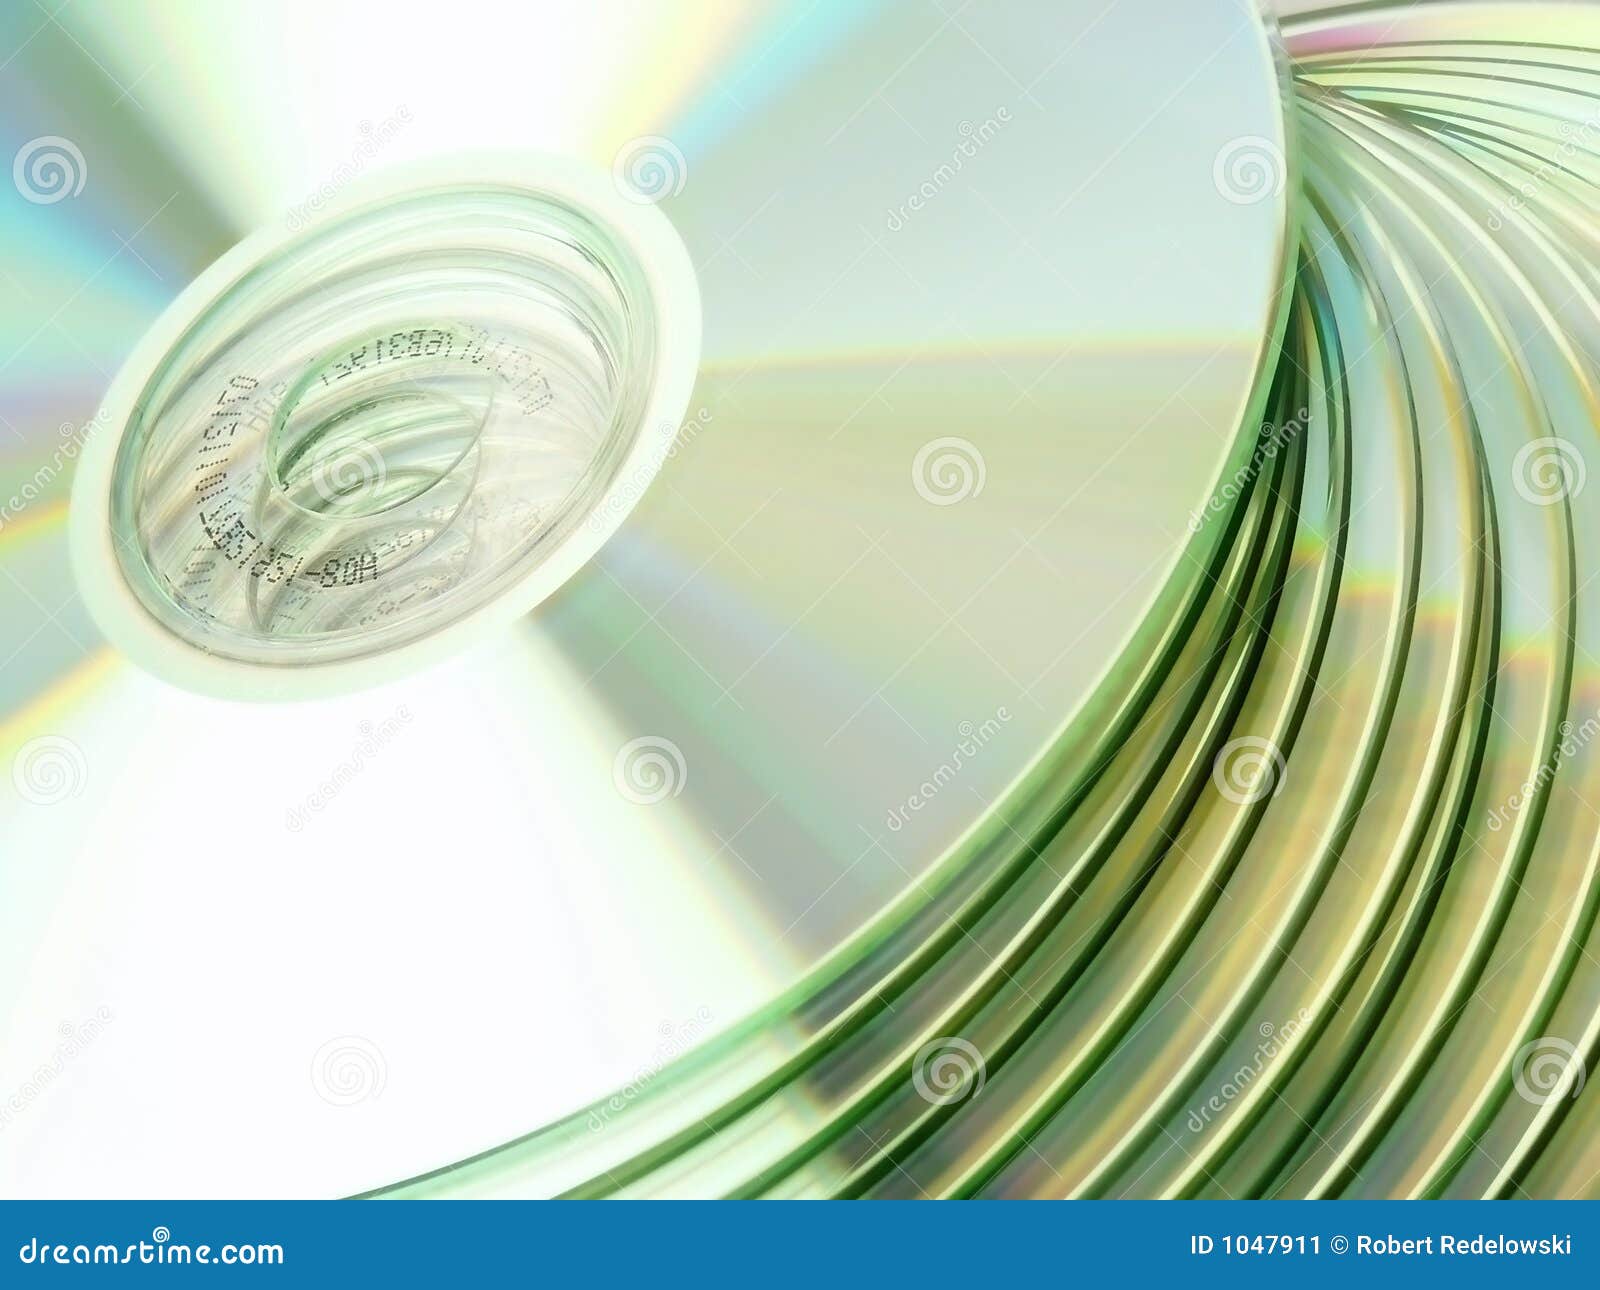 CD / DVD stock image. Image of compact, clip, clipped - 1047911